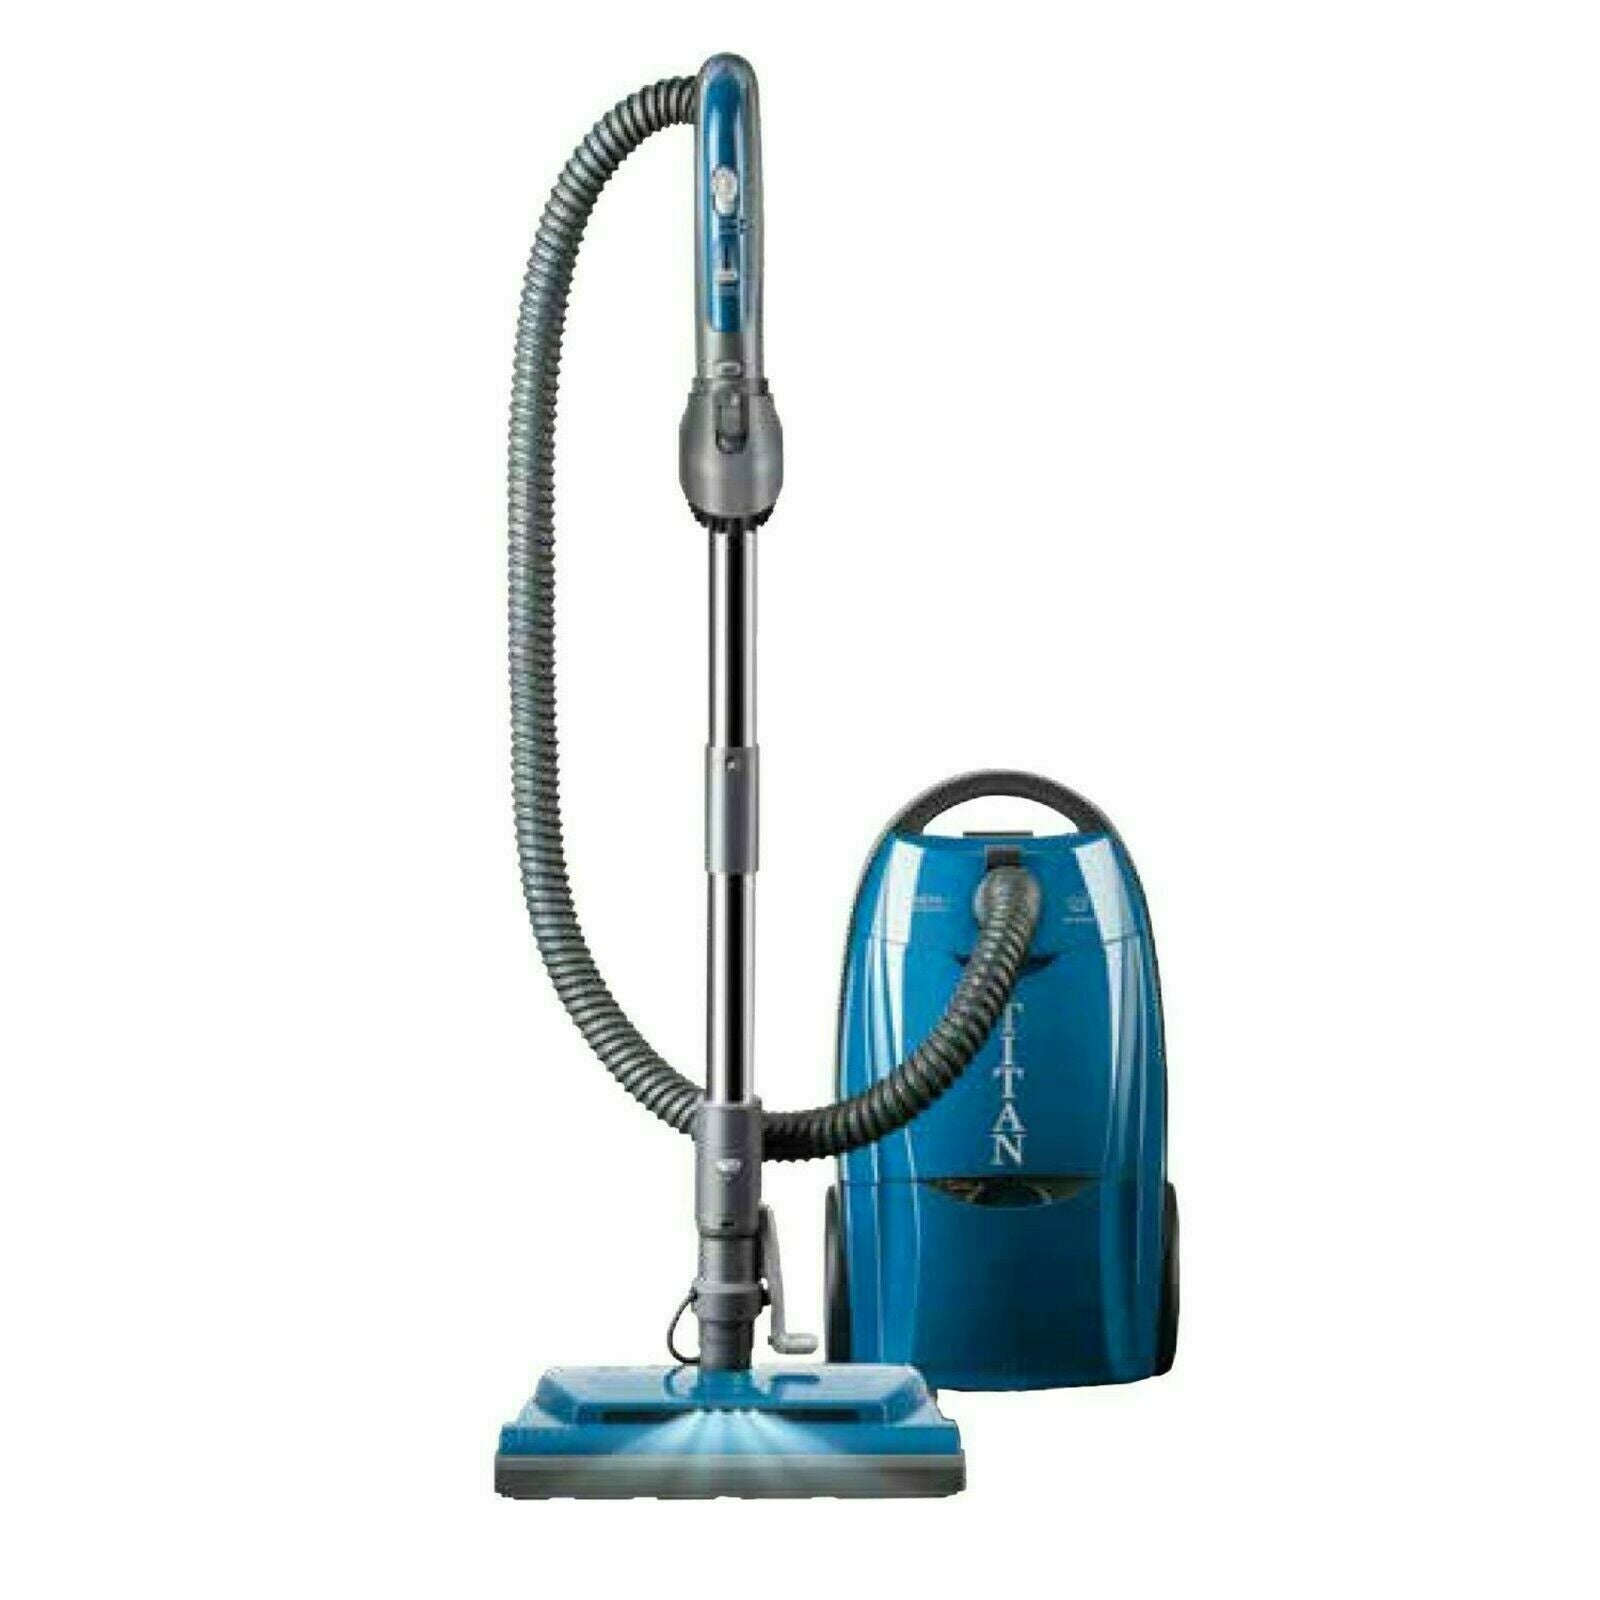 Titan, Titan T9200 Bagged Canister Vacuum Cleaner with Power Nozzle